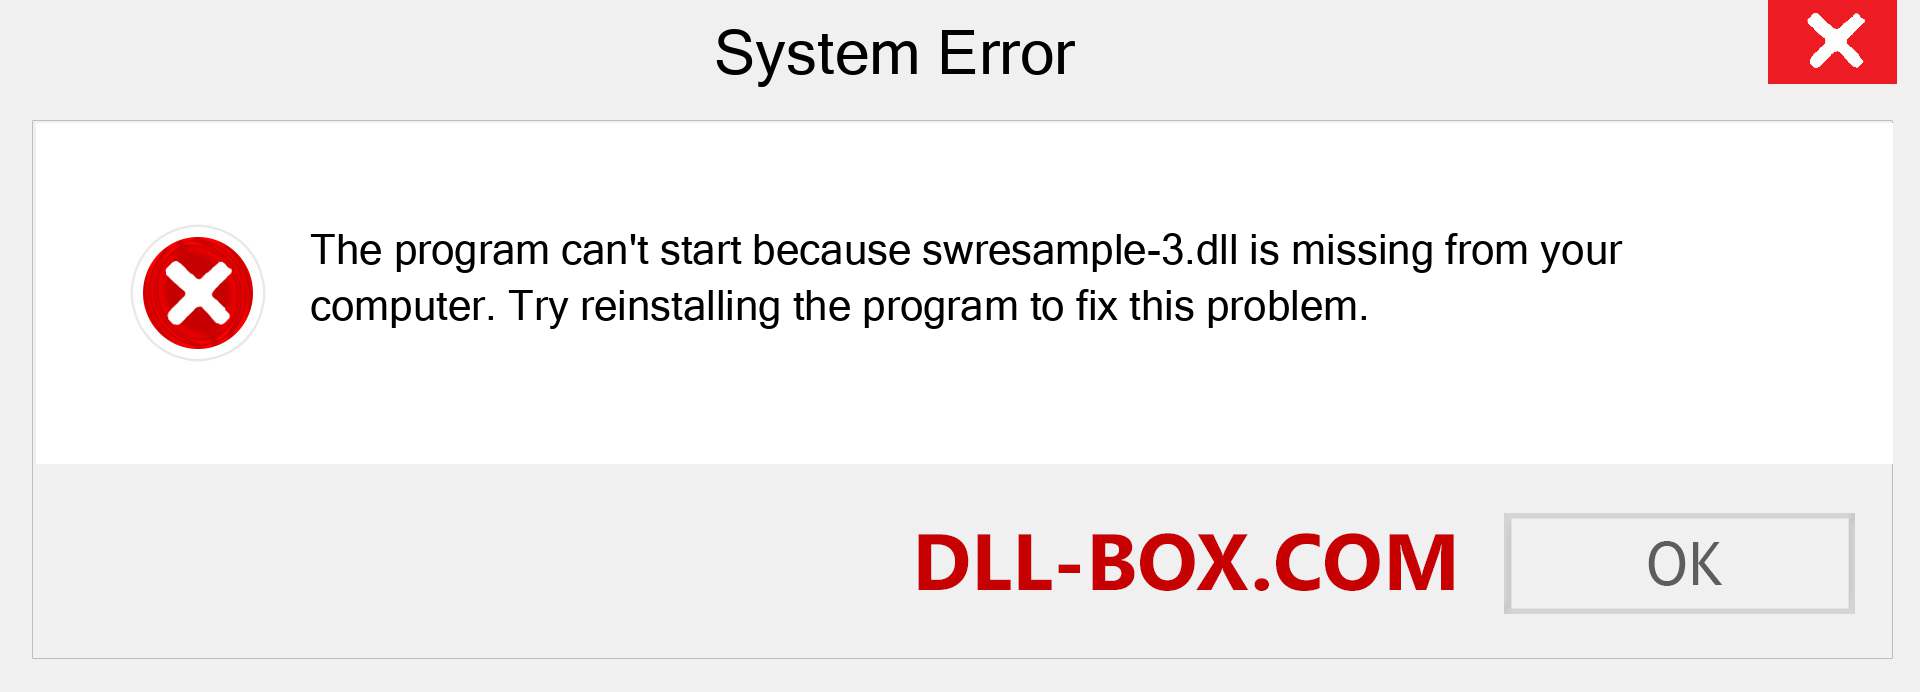  swresample-3.dll file is missing?. Download for Windows 7, 8, 10 - Fix  swresample-3 dll Missing Error on Windows, photos, images